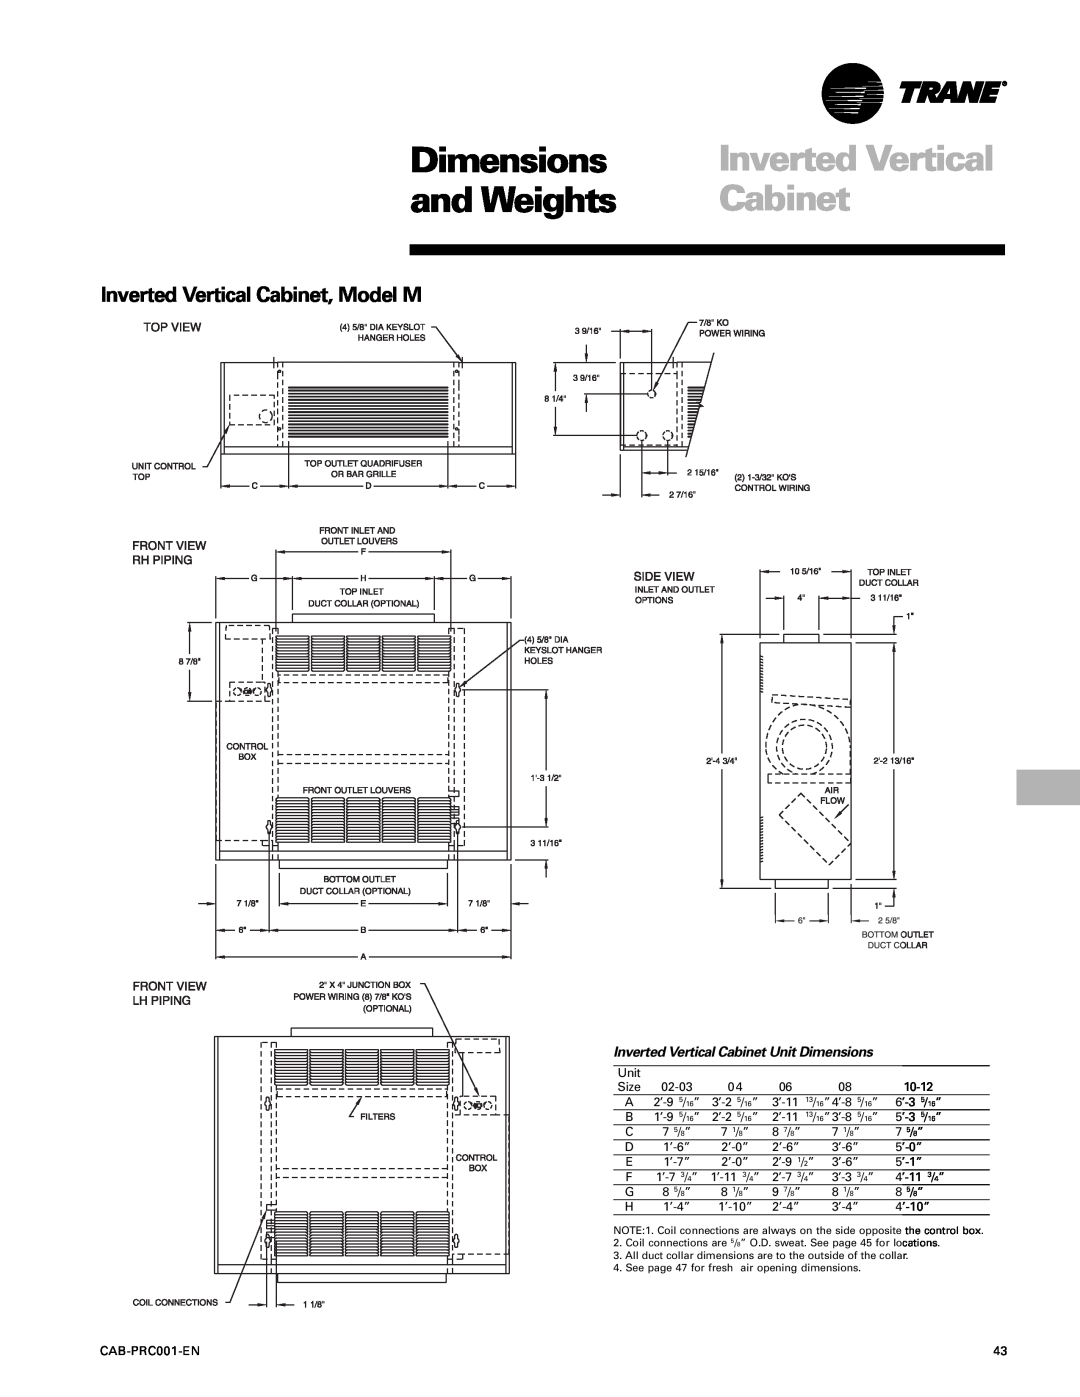 Trane CAB-PRC001-EN manual Dimensions, and Weights, Inverted Vertical Cabinet, Model M 